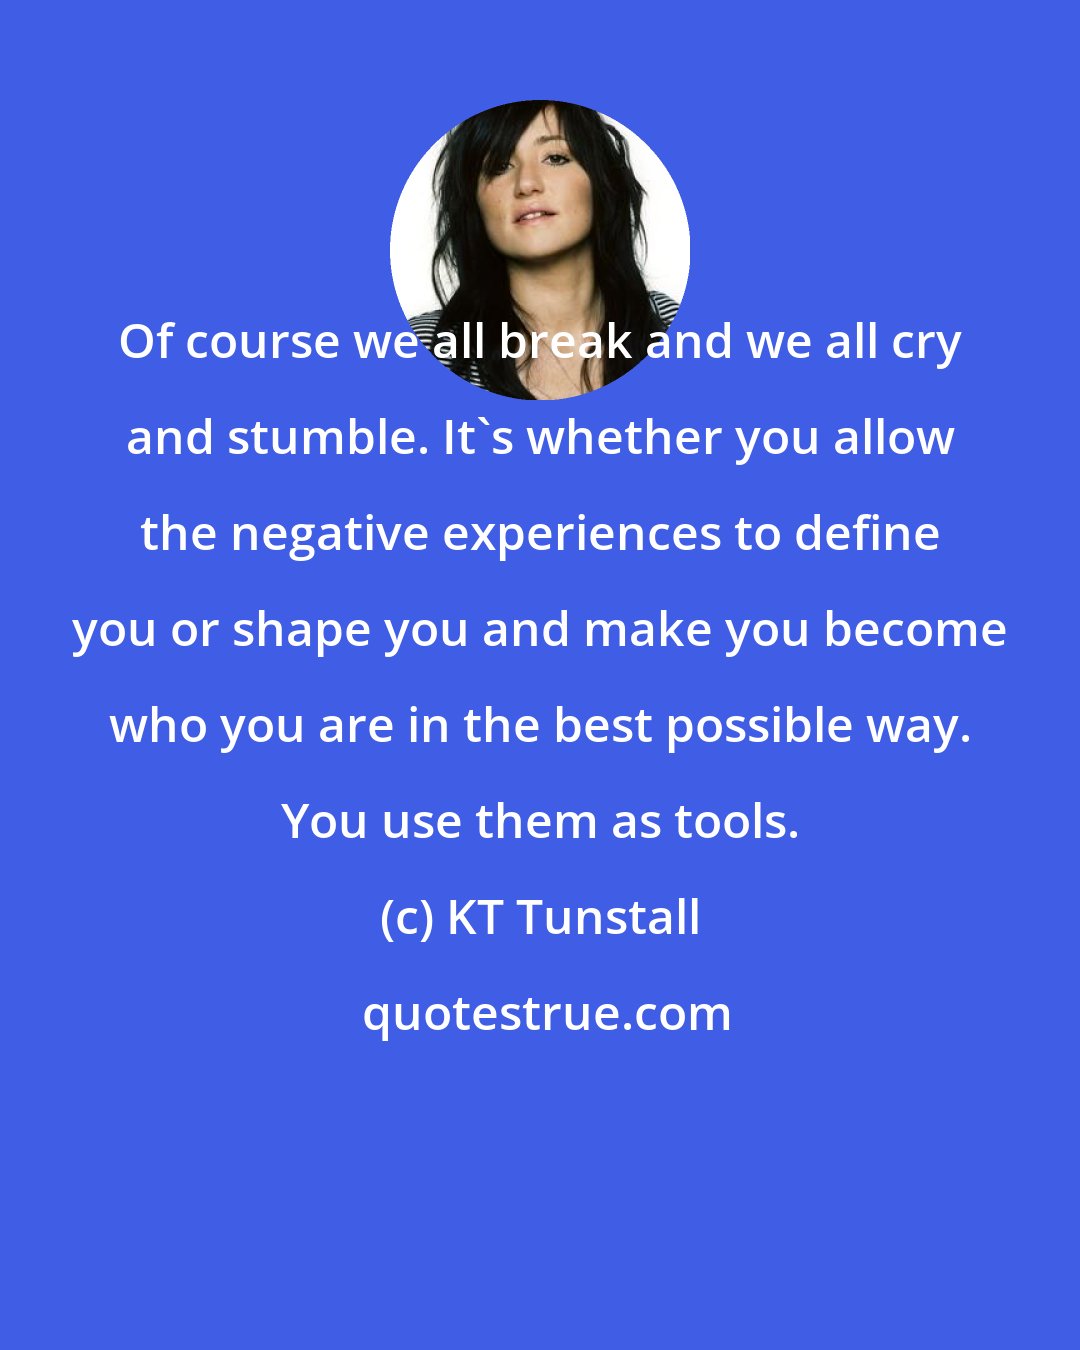 KT Tunstall: Of course we all break and we all cry and stumble. It's whether you allow the negative experiences to define you or shape you and make you become who you are in the best possible way. You use them as tools.